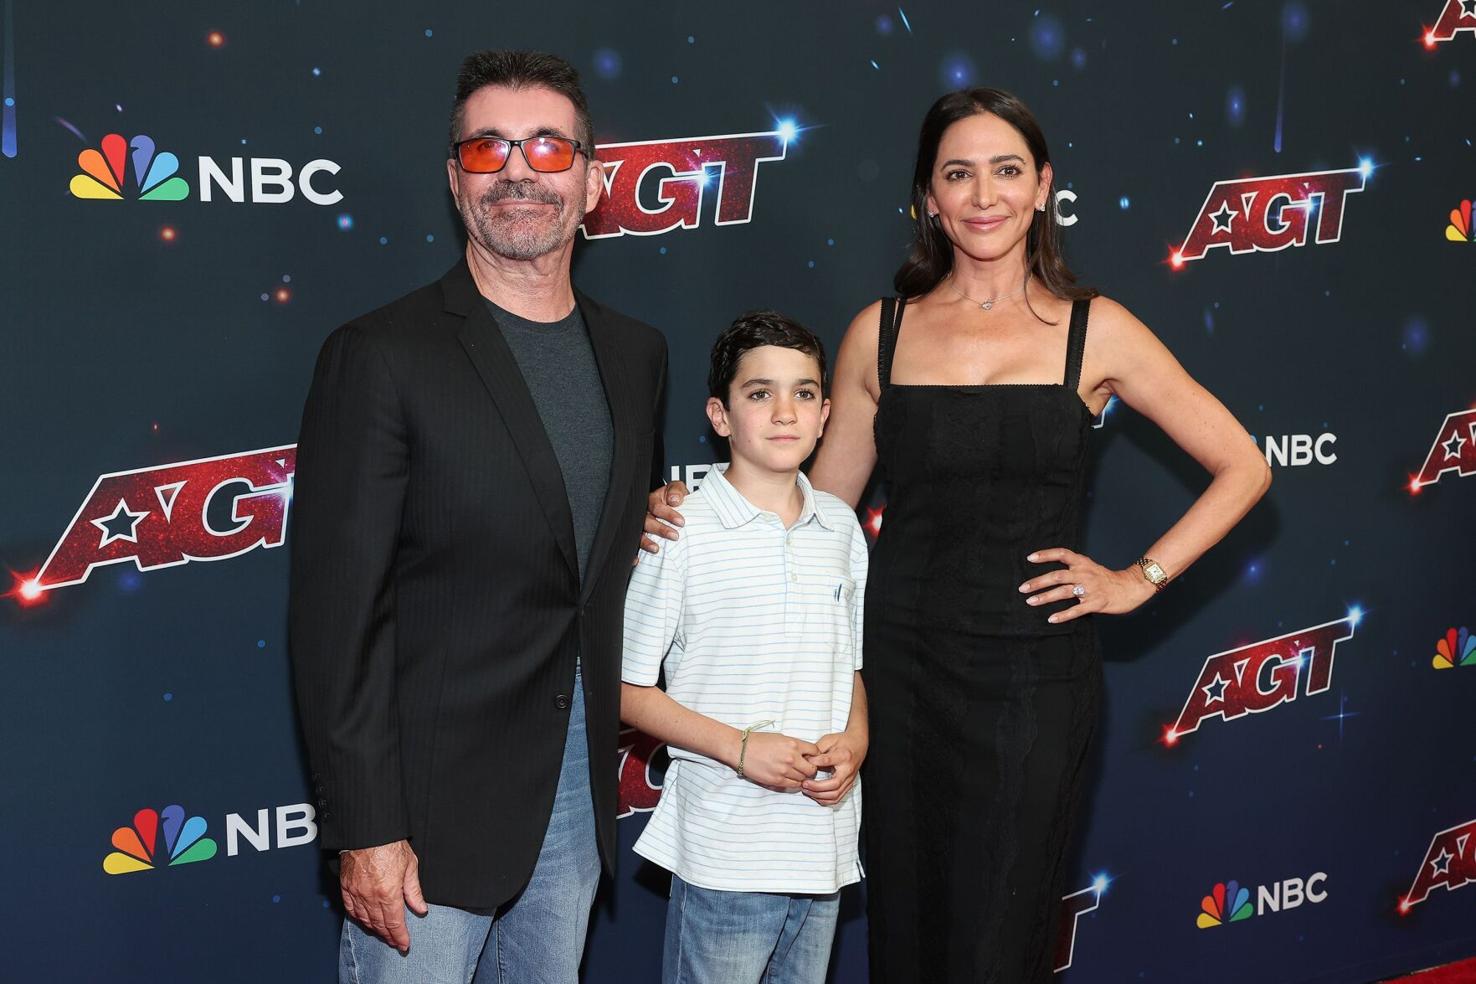 Simon Cowell credits his son for saving him from a ‘downward spiral